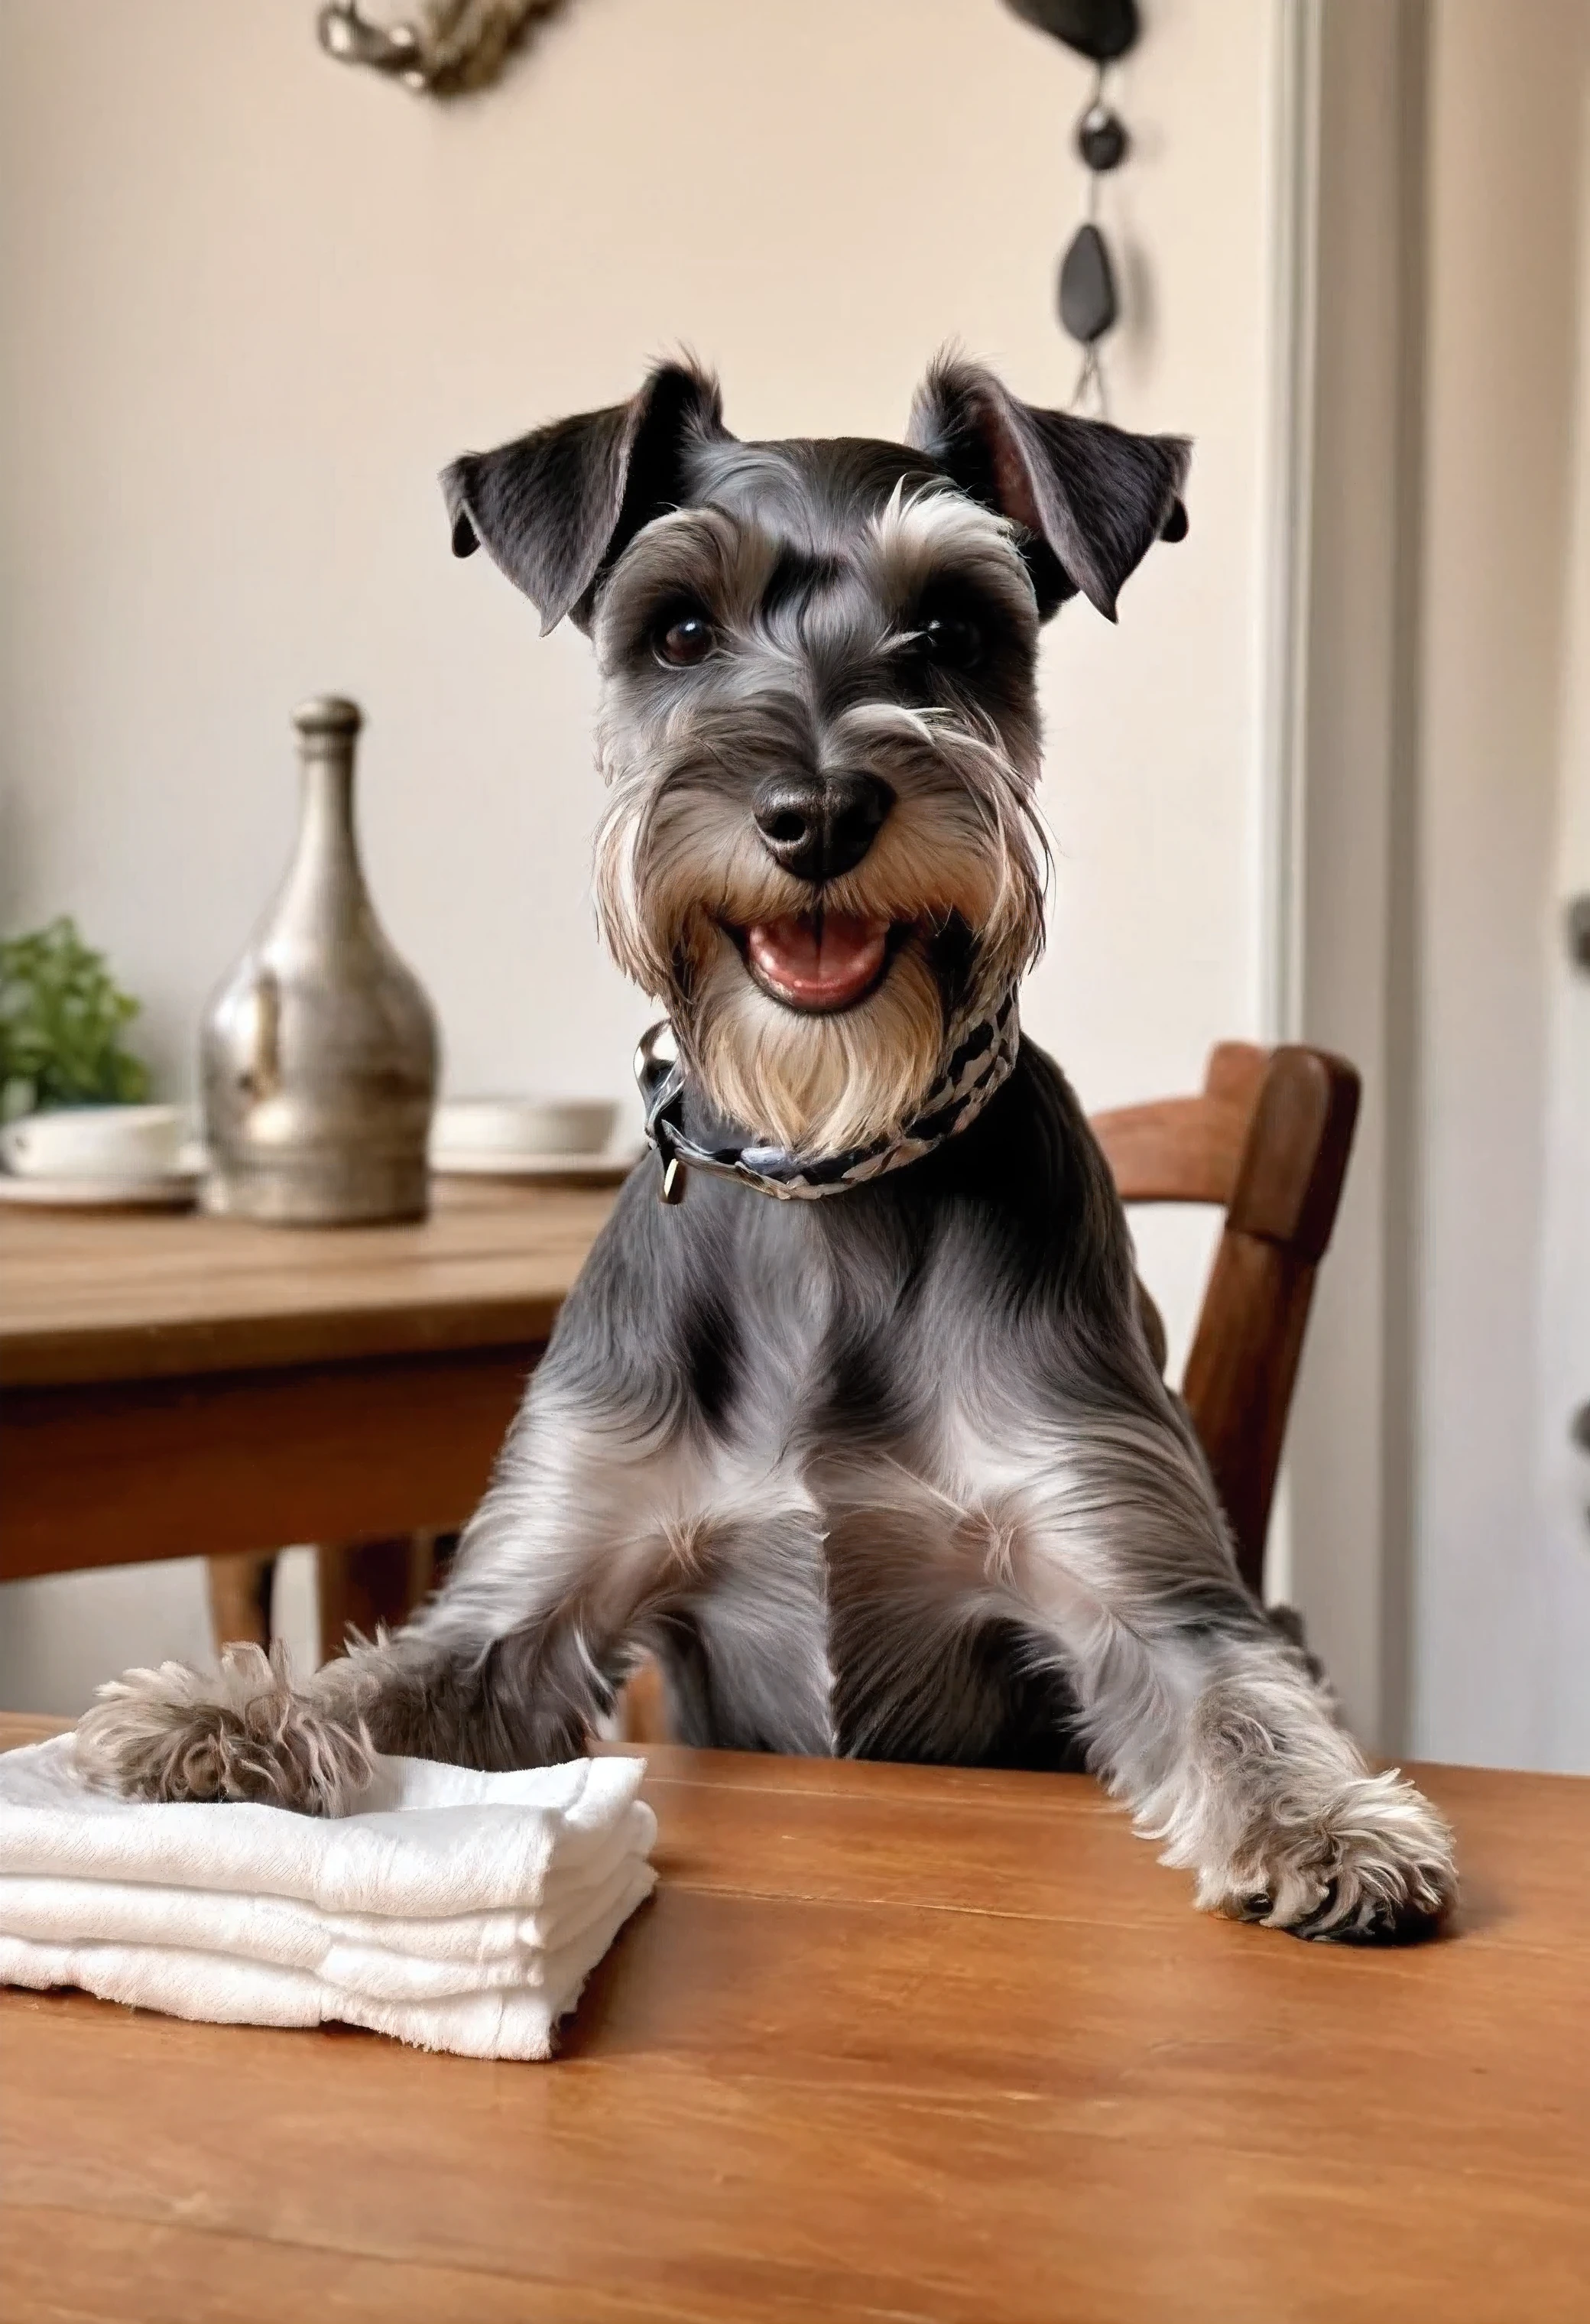 funny photo of a Miniature Schnauzer dog smiling and sitting at a table in front of a bowl with a napkin tied around its neck,Photorealism,8k rendering,naturalistic photo of an animal dog (Mittelschnauzer),